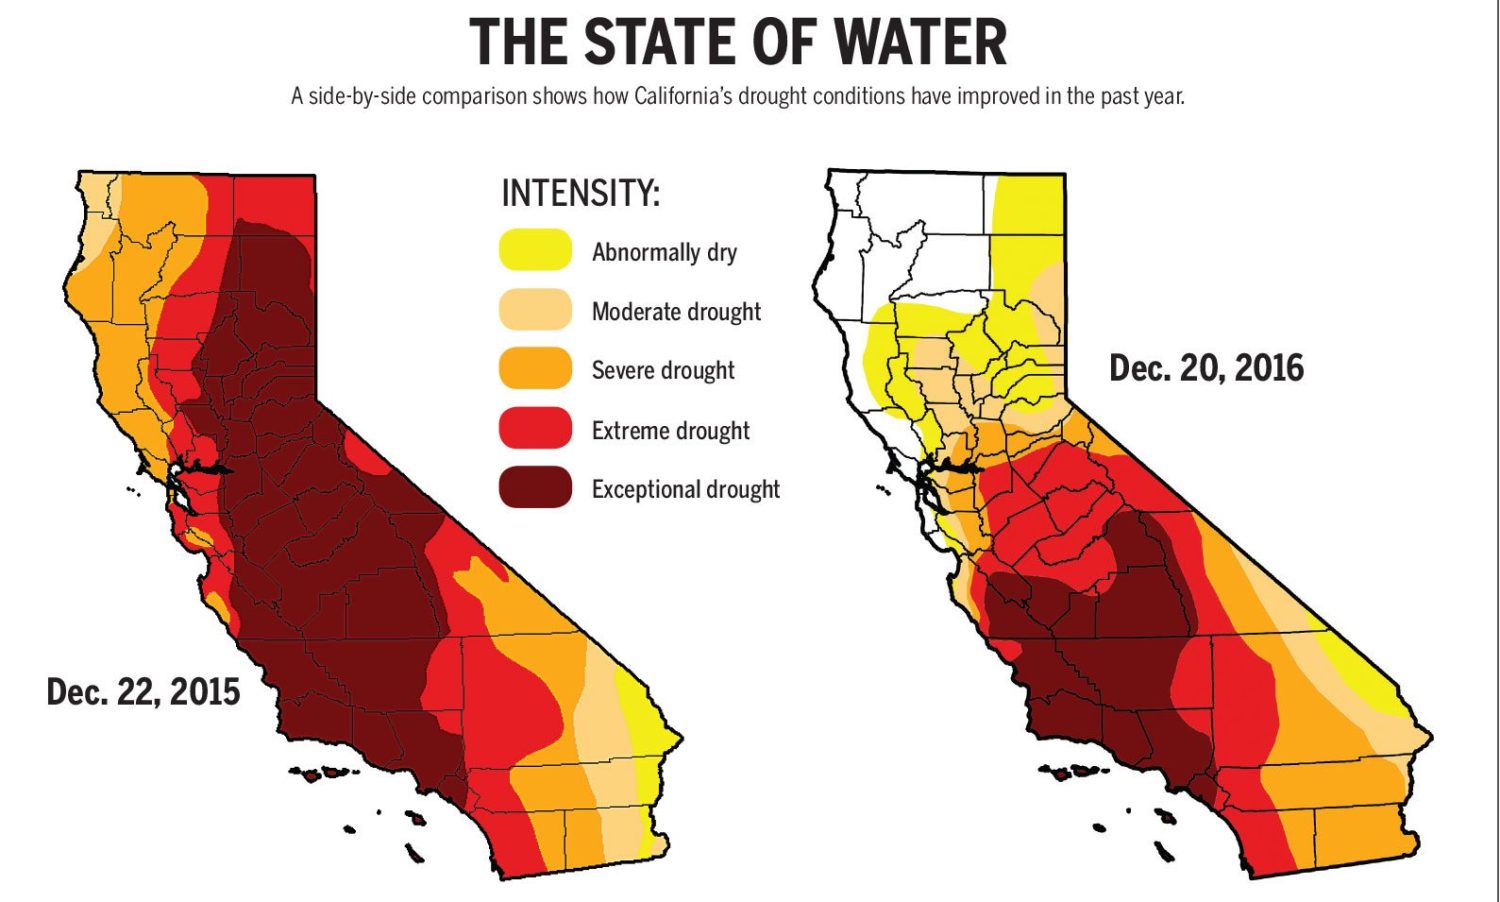 California in Severe Drought!… Or is it? RedZone